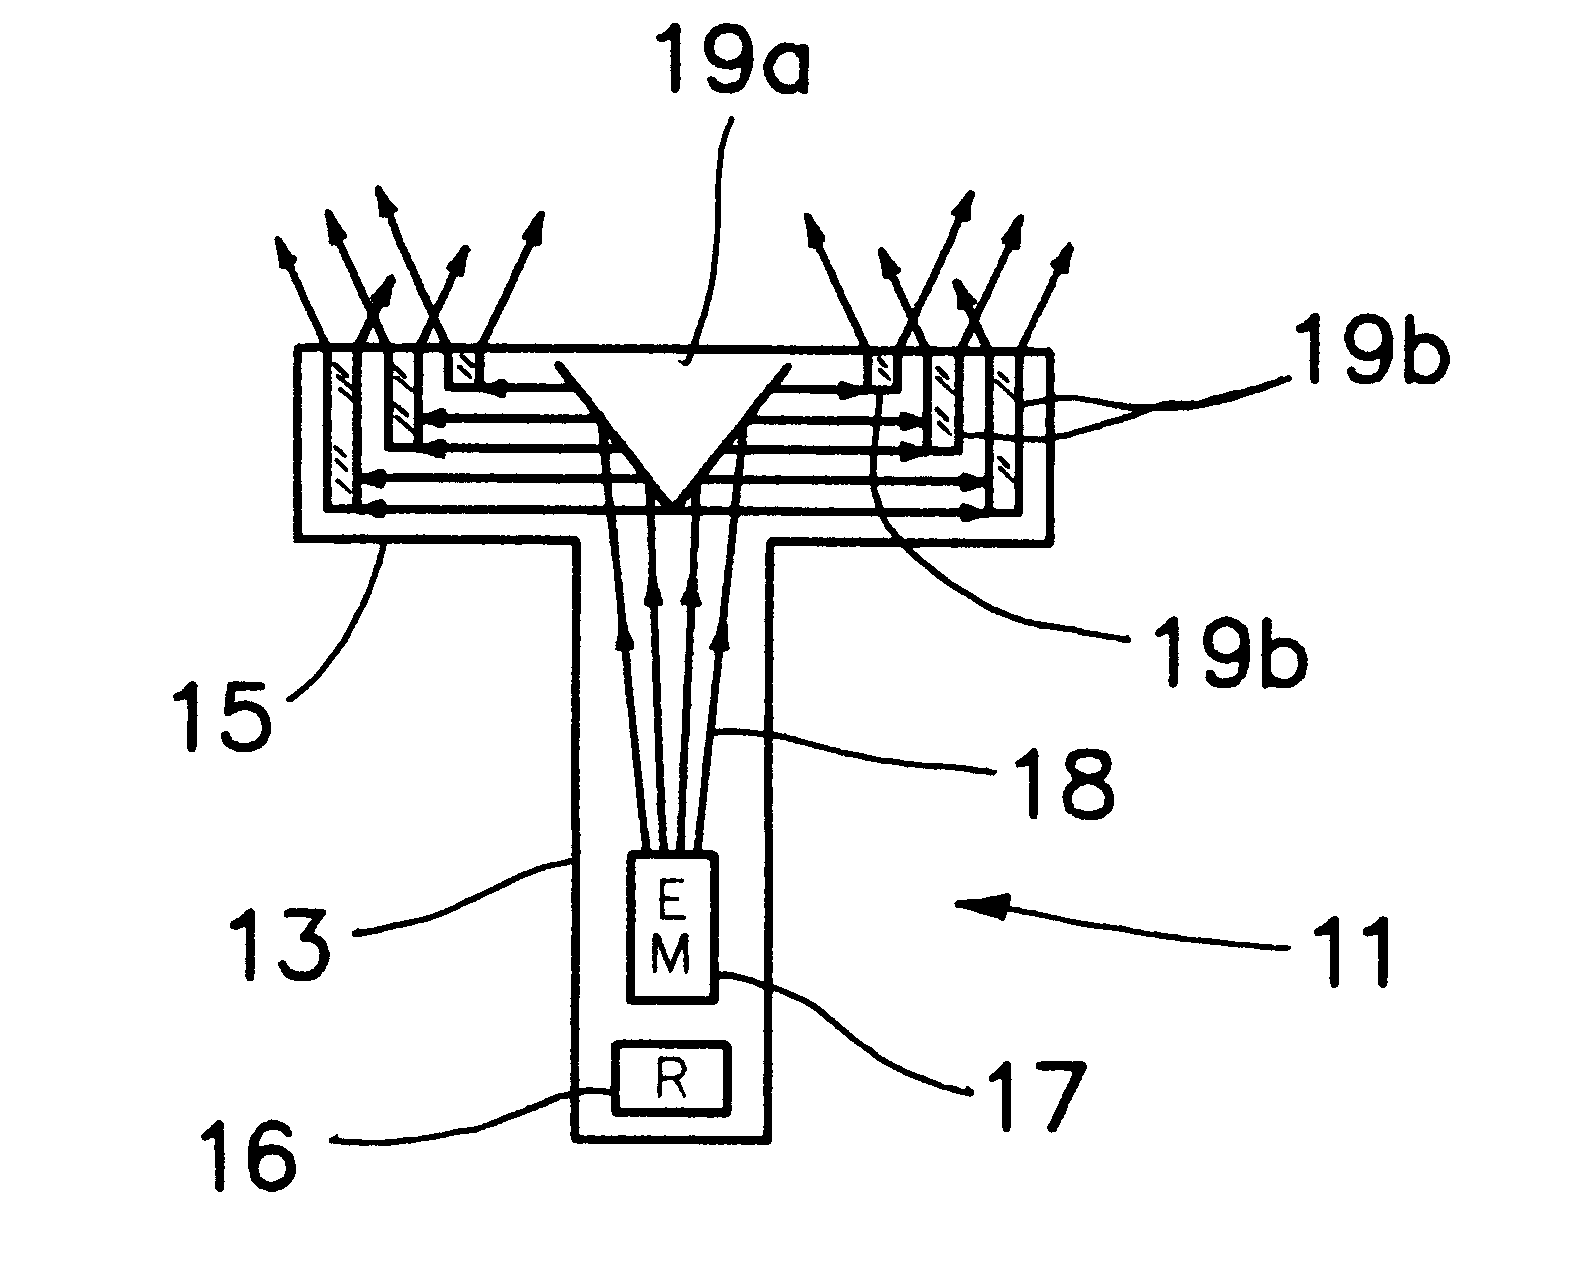 Light-activated hair treatment and removal device